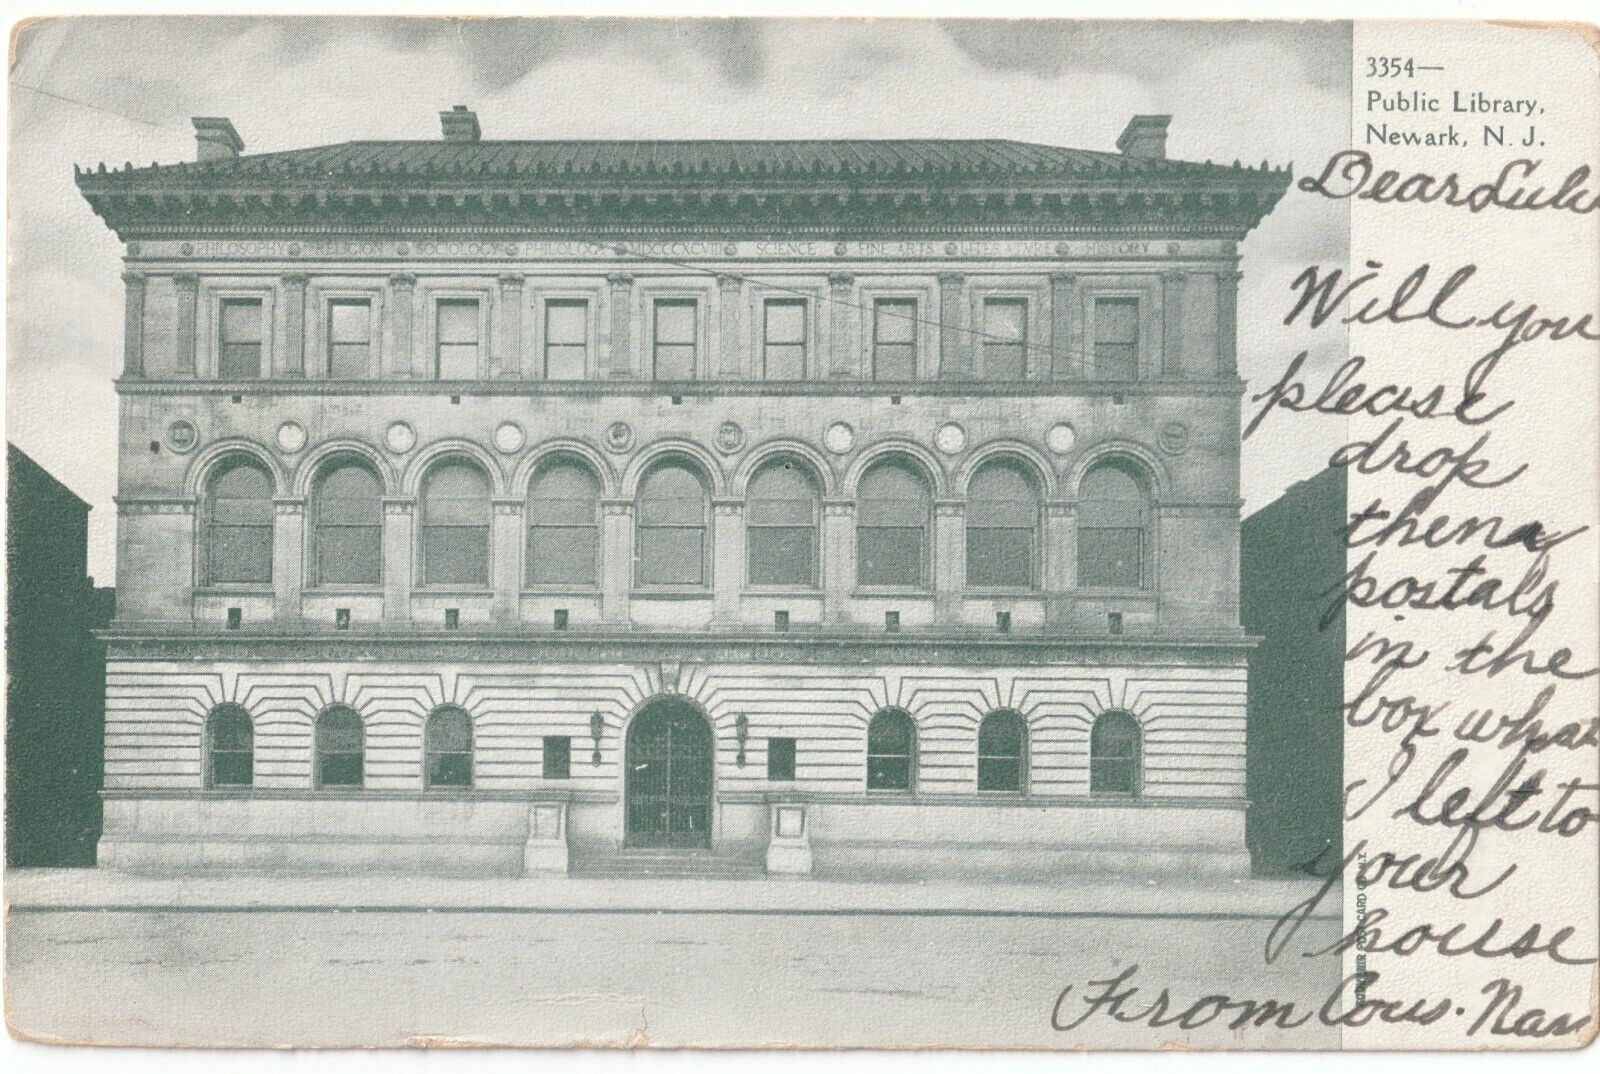 Public Library-Newark, New Jersey NJ-1906 posted antique postcard